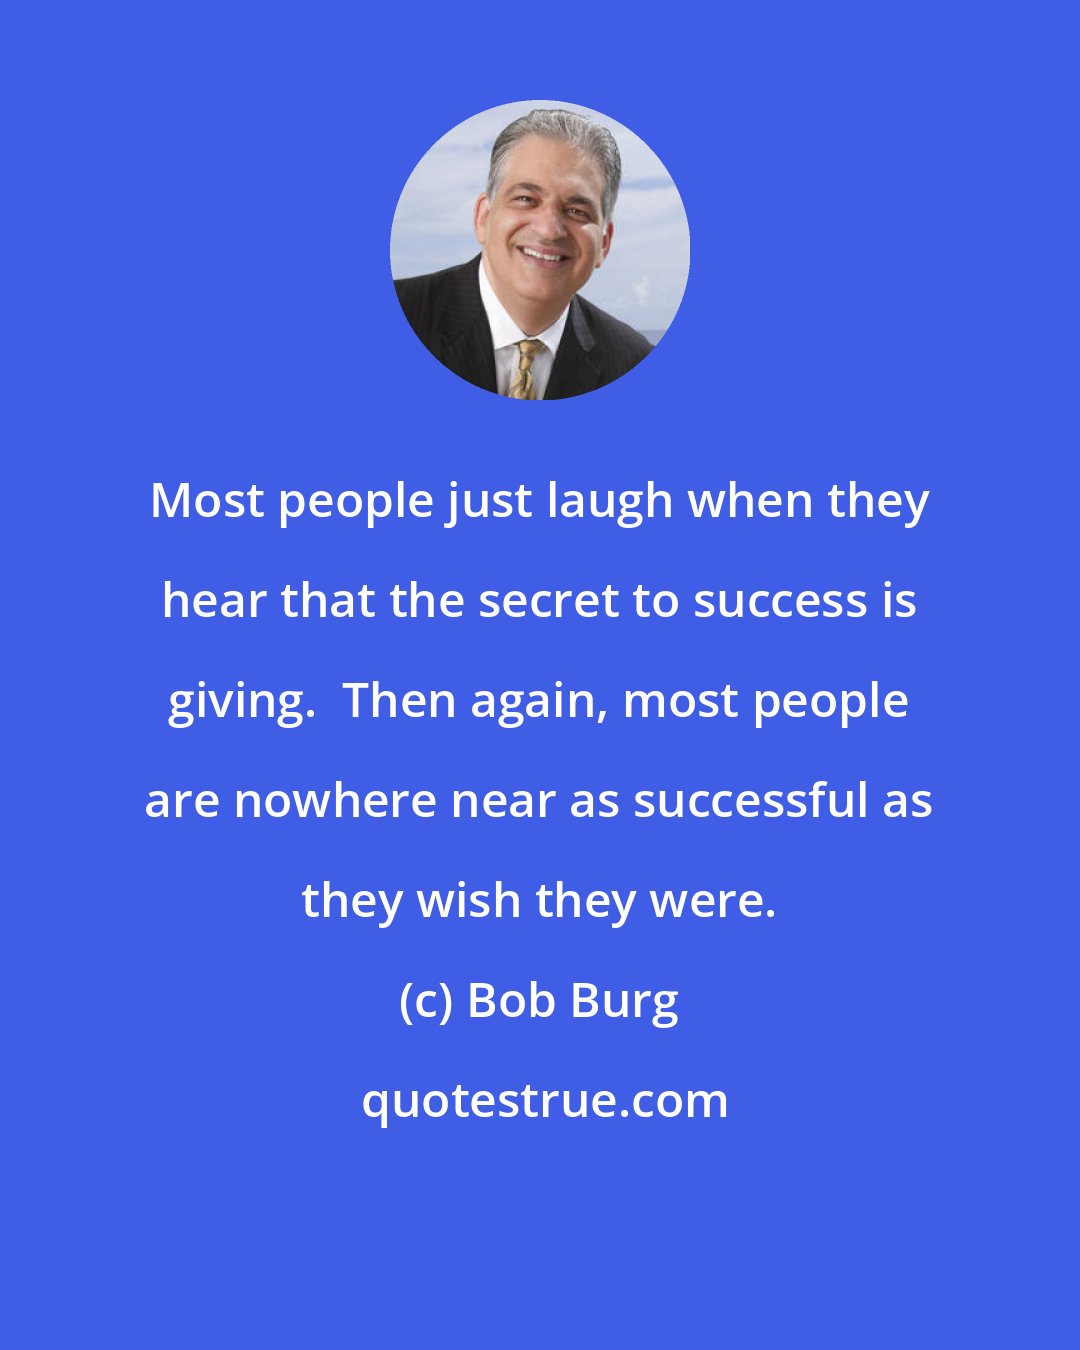 Bob Burg: Most people just laugh when they hear that the secret to success is giving.  Then again, most people are nowhere near as successful as they wish they were.